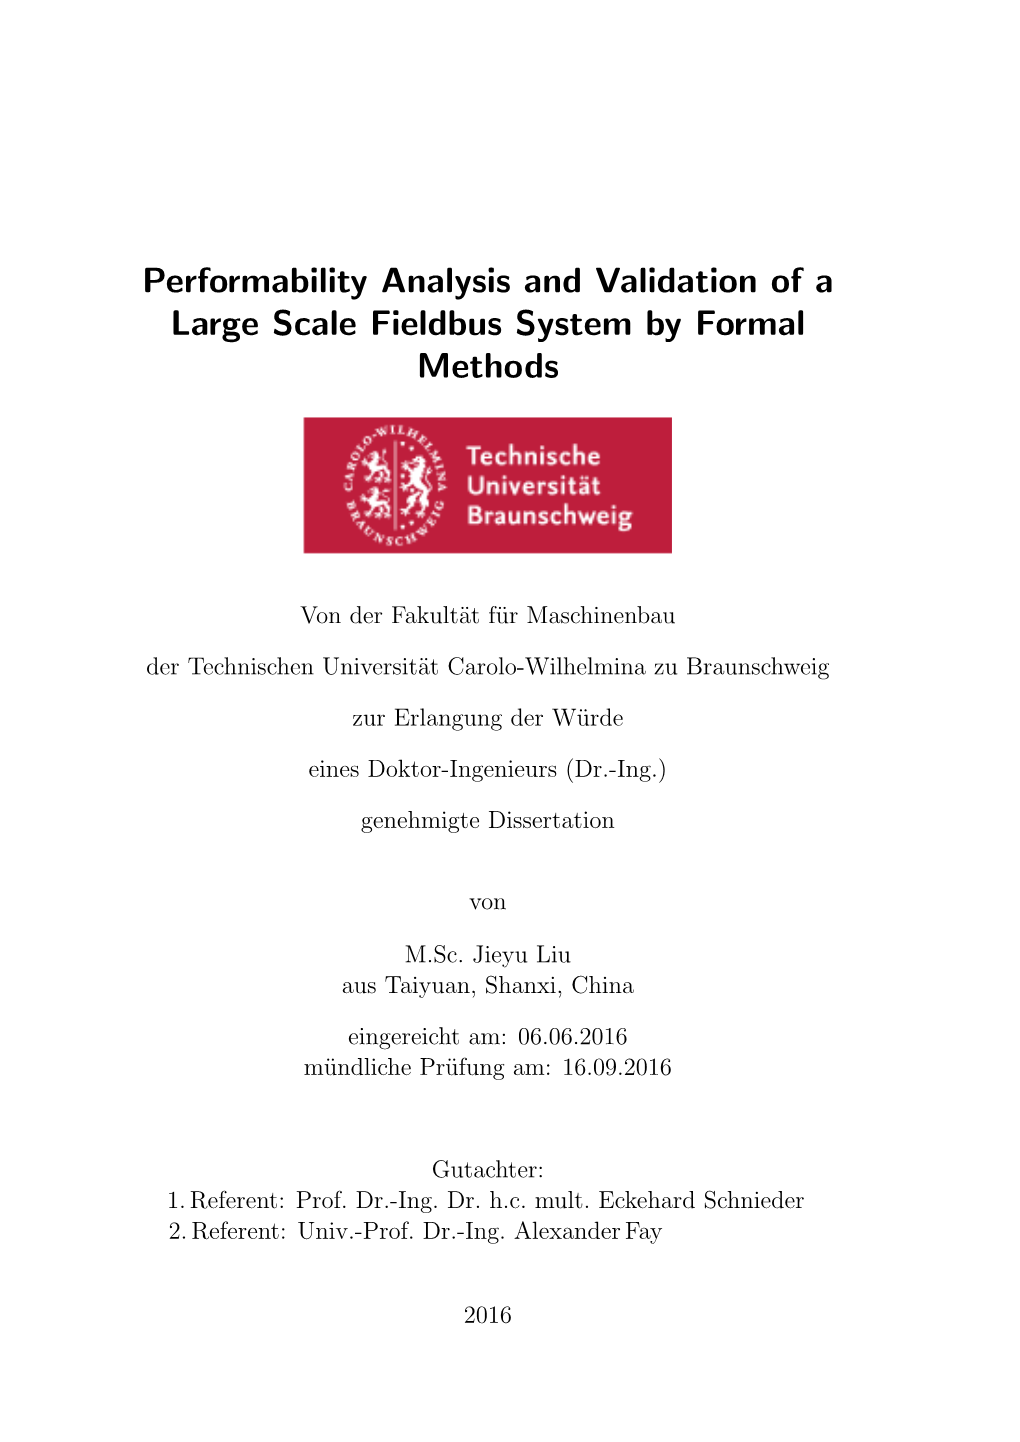 Performability Analysis and Validation of a Large Scale Fieldbus System by Formal Methods